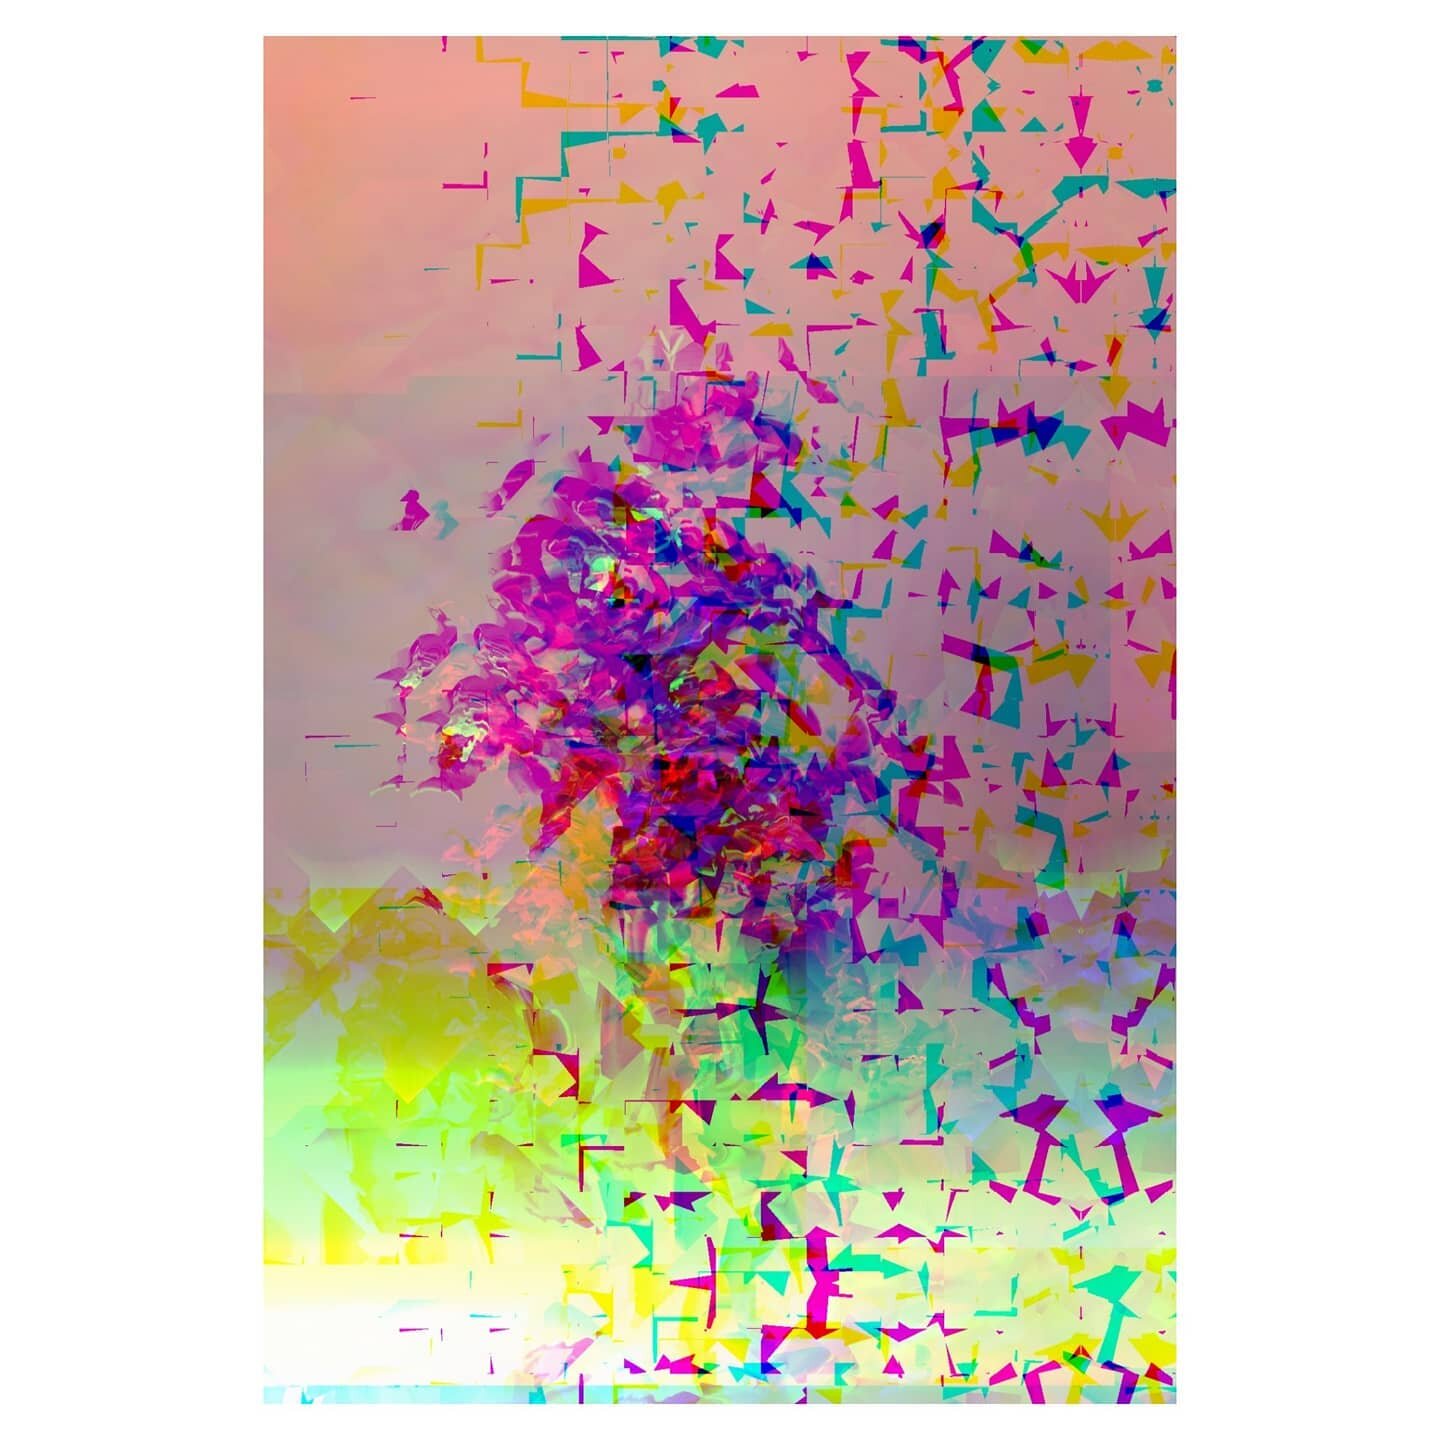 🤔🤔🤔👅👅👅 #memories are a #taste of the #past with #flaws and #errors
.
.
.
#hkig #hkiger #glitch #glitchart #decontextualization #decay